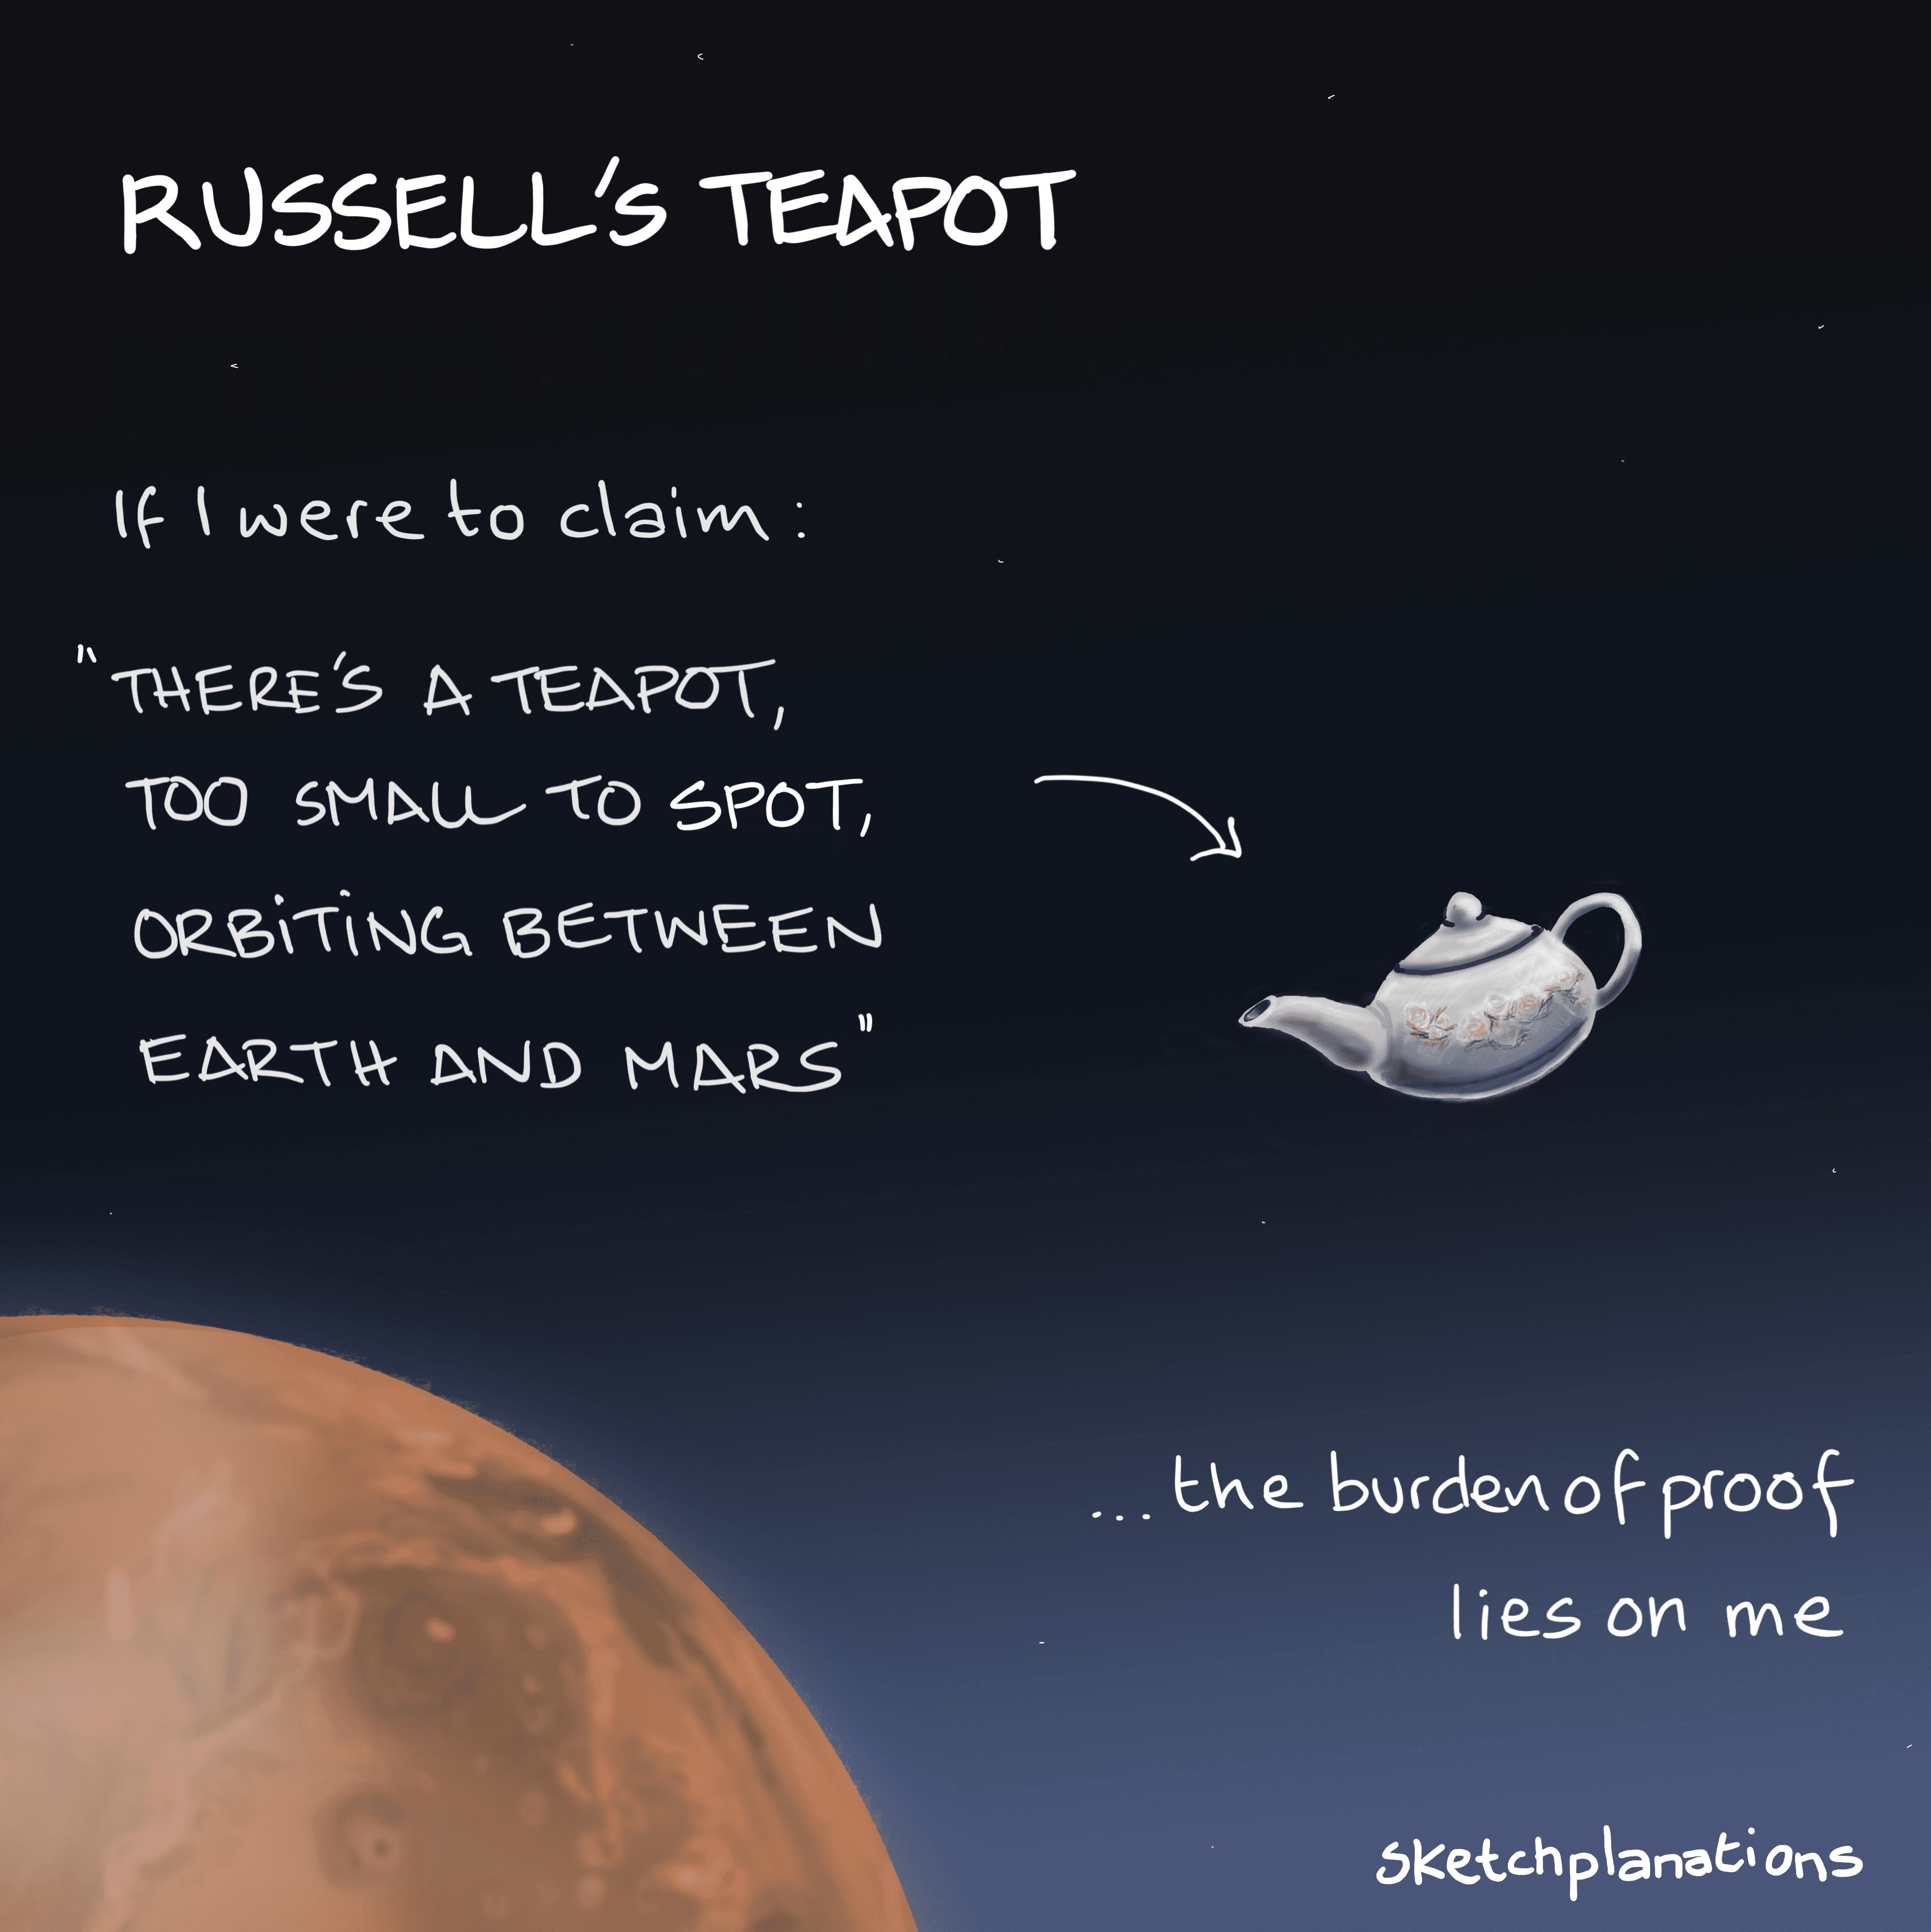 Russell's Teapot - Sketchplanations